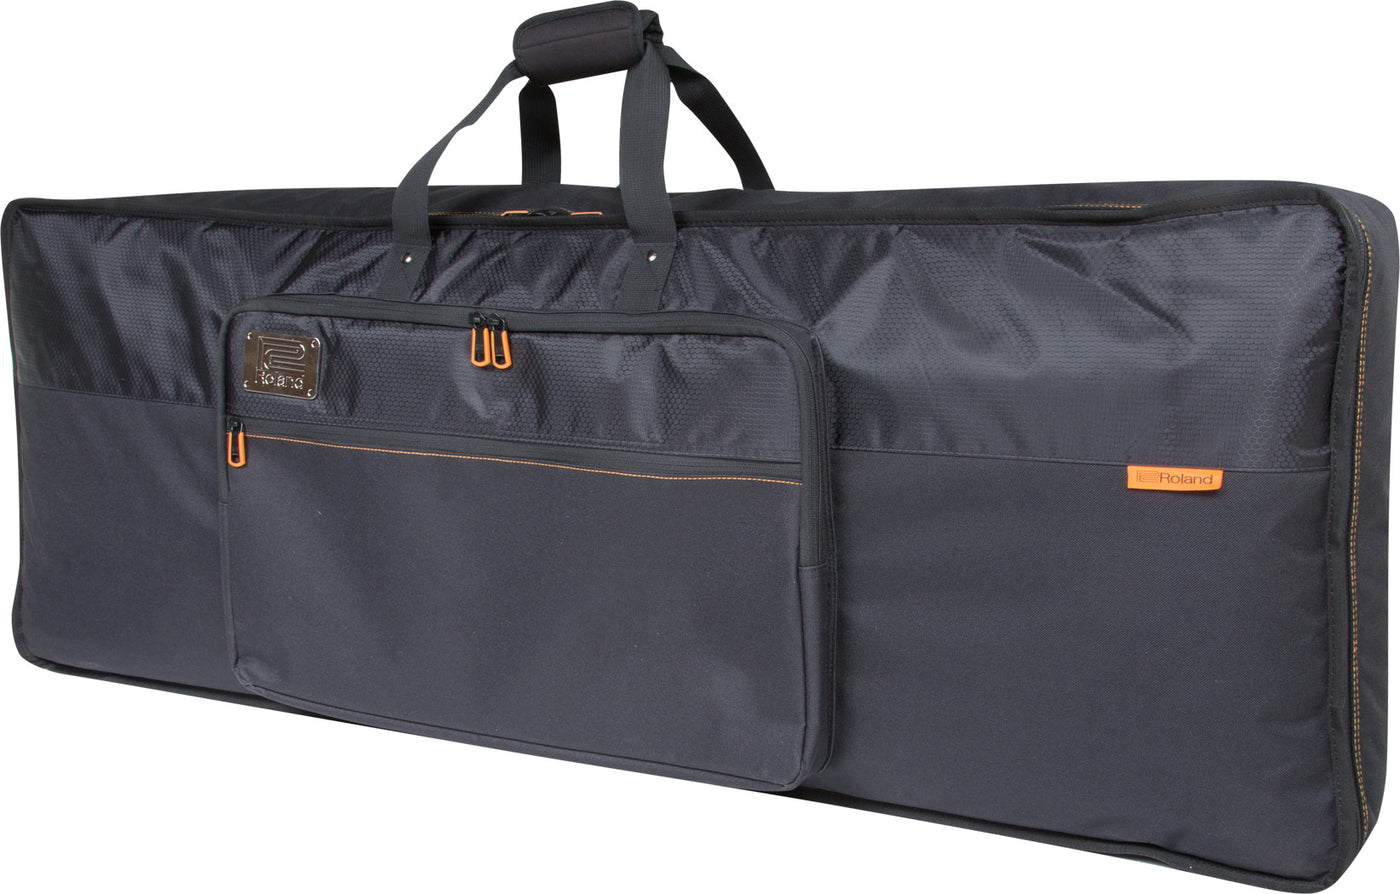 Roland CB-B61 Keyboard Bag, 61 Key with Backpack Straps